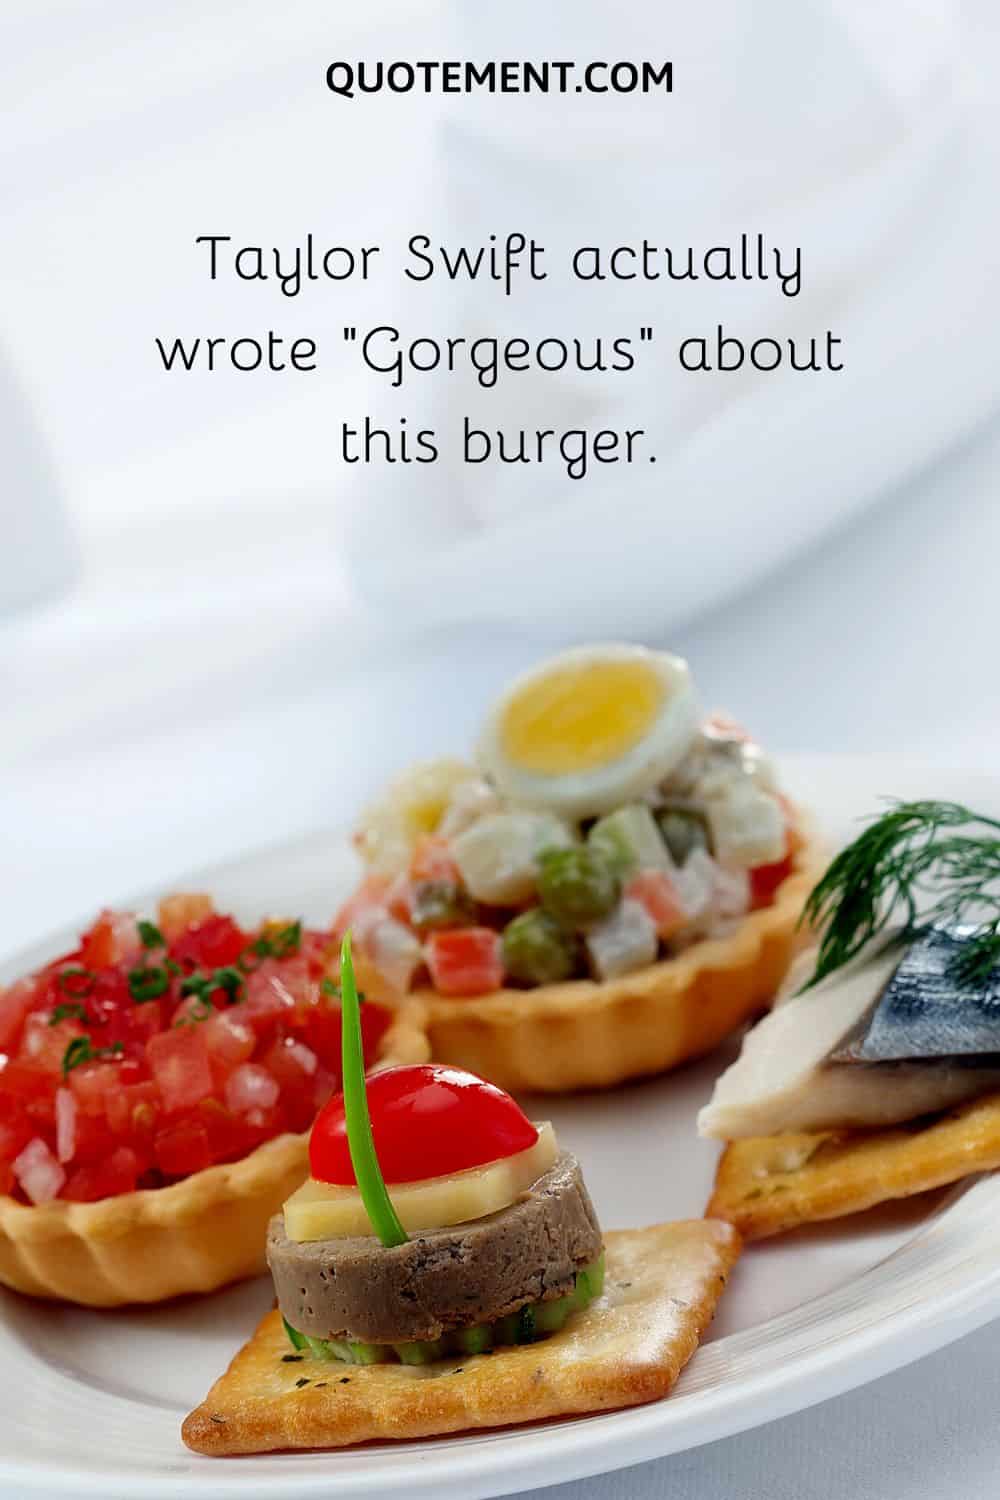 Taylor Swift actually wrote “Gorgeous” about this burger.